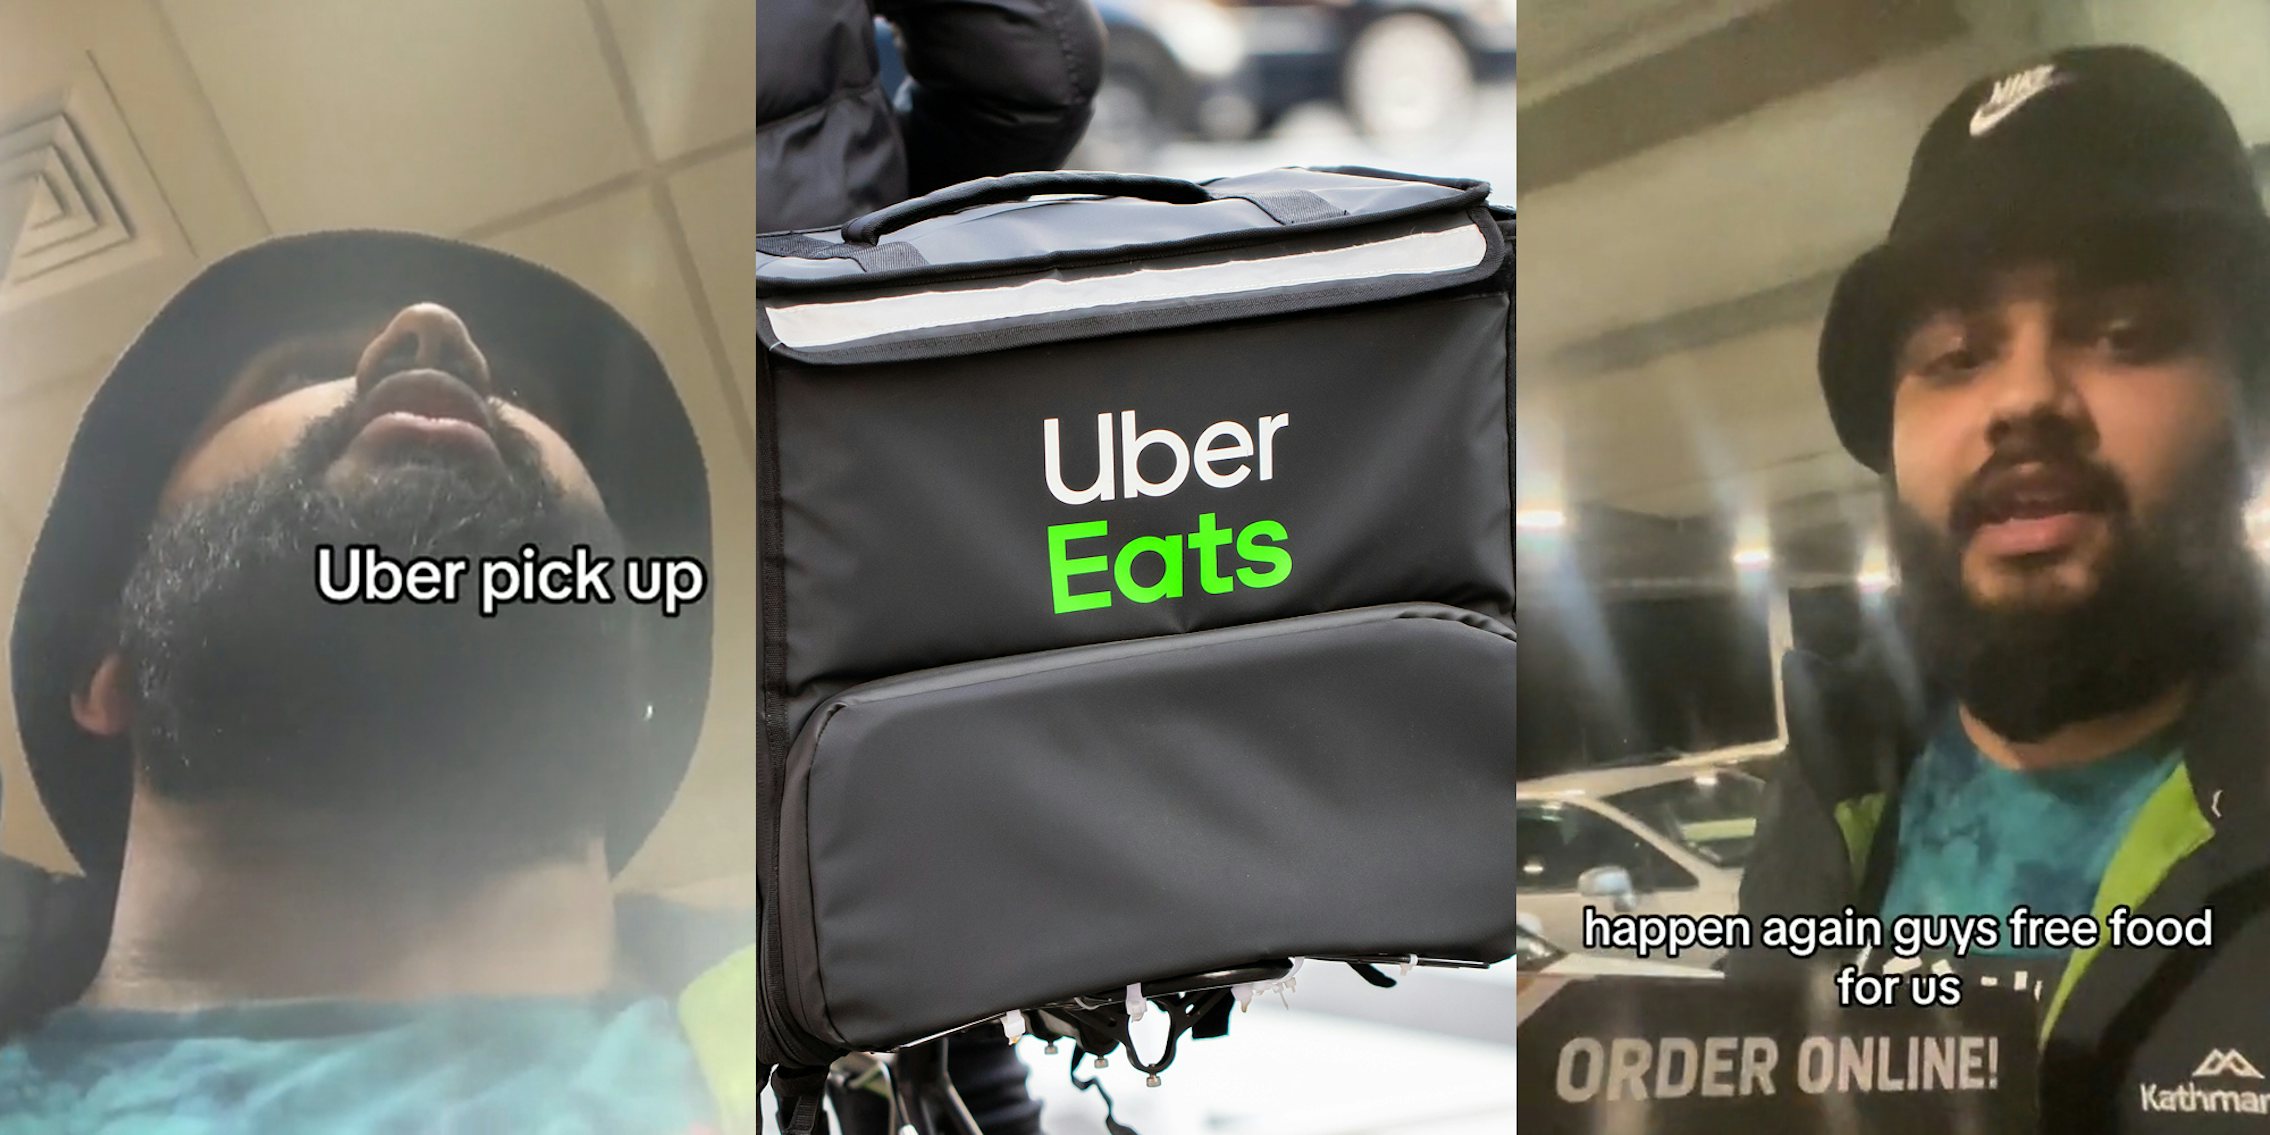 man in restaurant with caption 'Uber pick up' (l) Uber Eats bag with logo (c) man holding food speaking with caption 'happen again guys free food for us' (r)